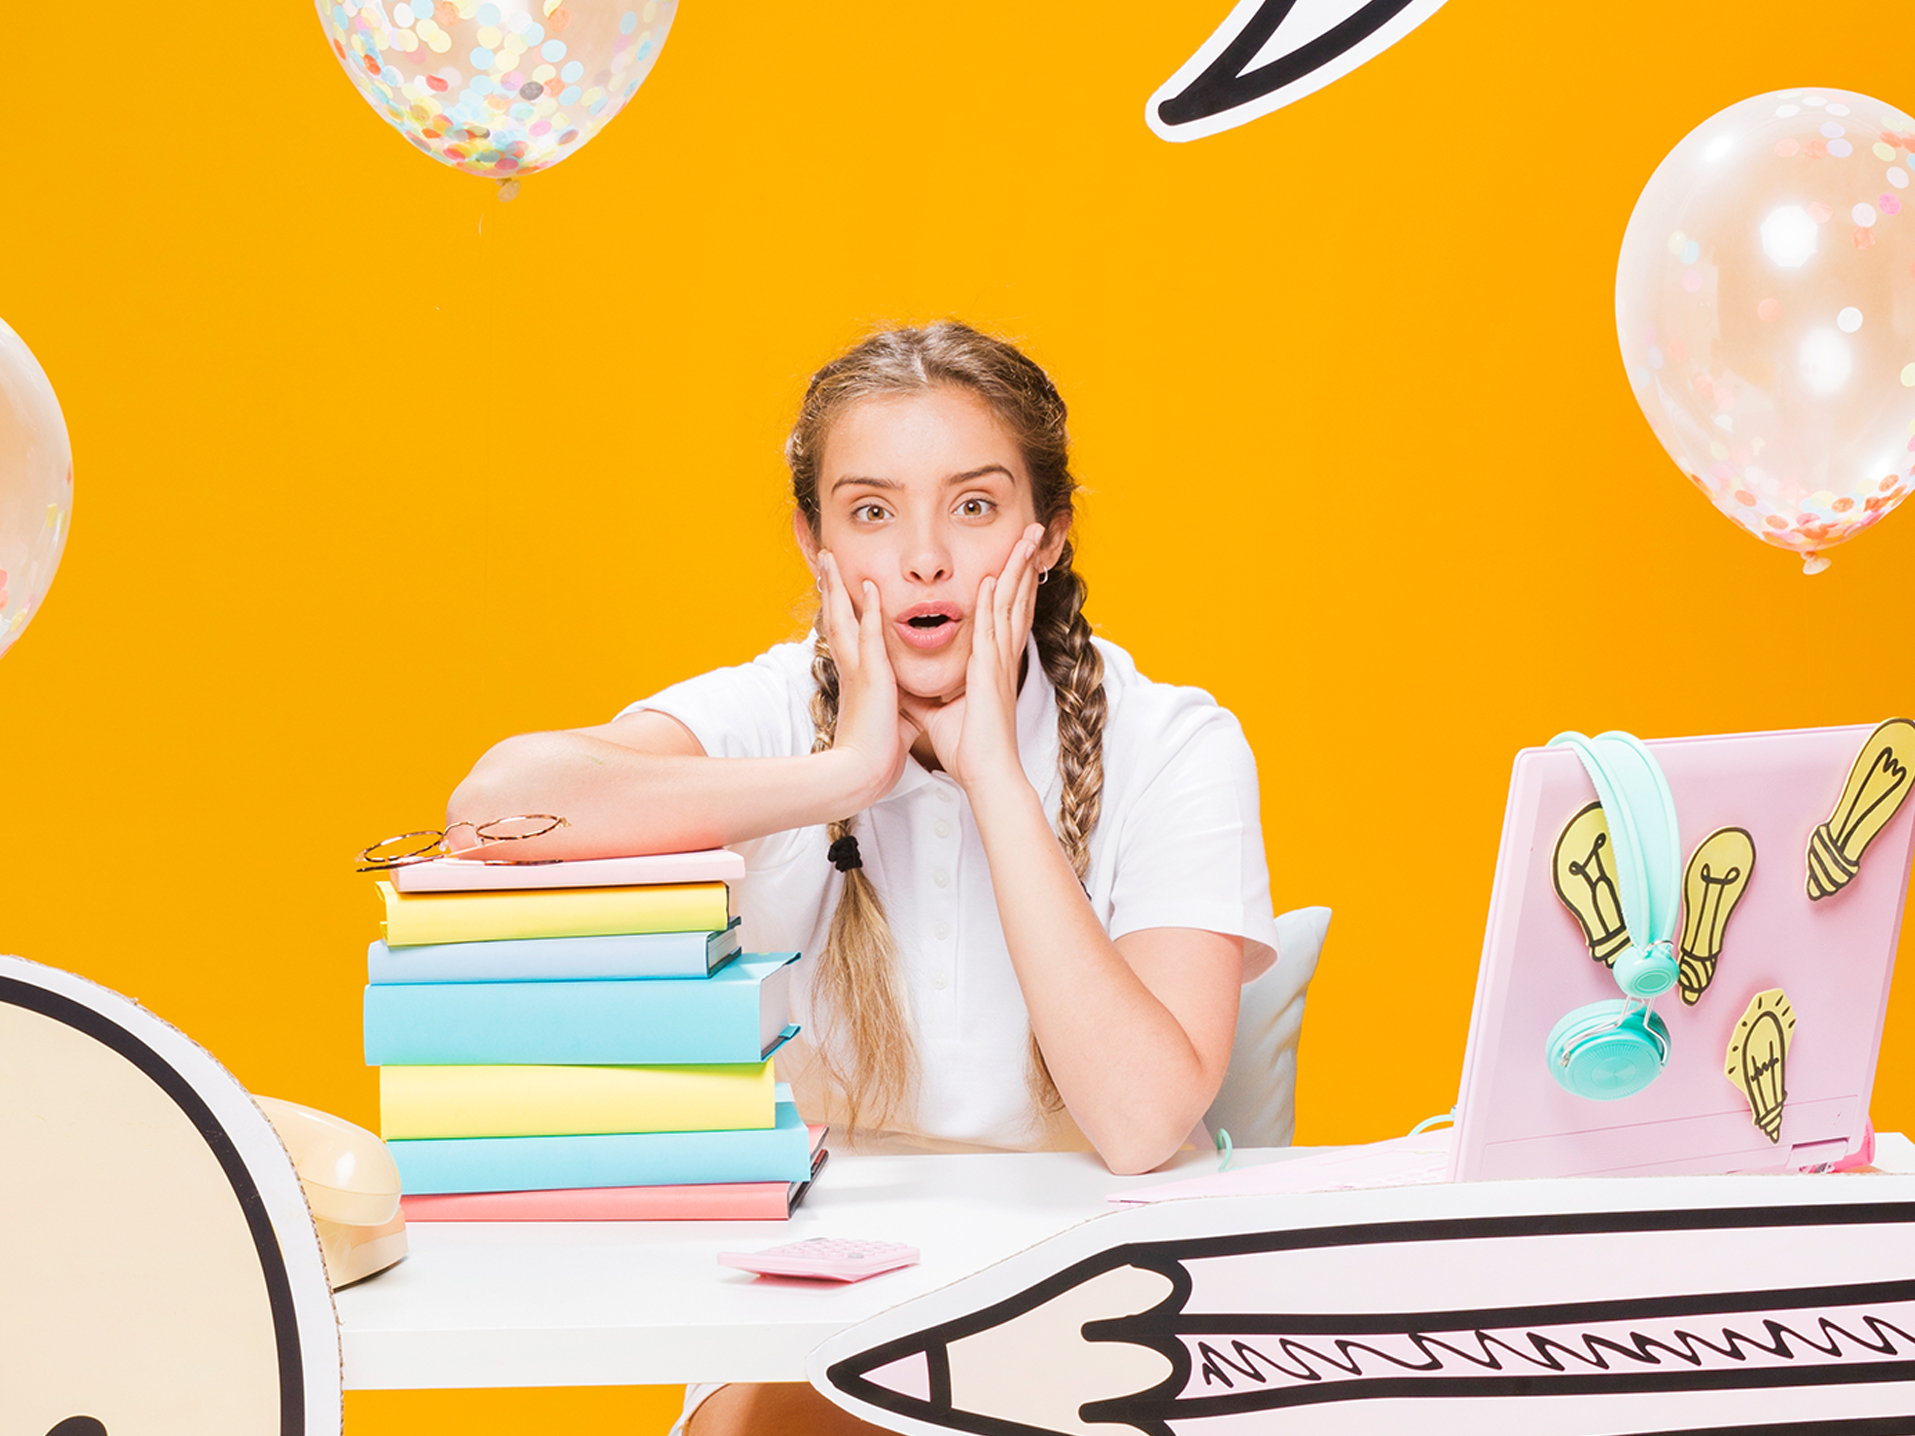 School girl sitting at a desk surrounded by props